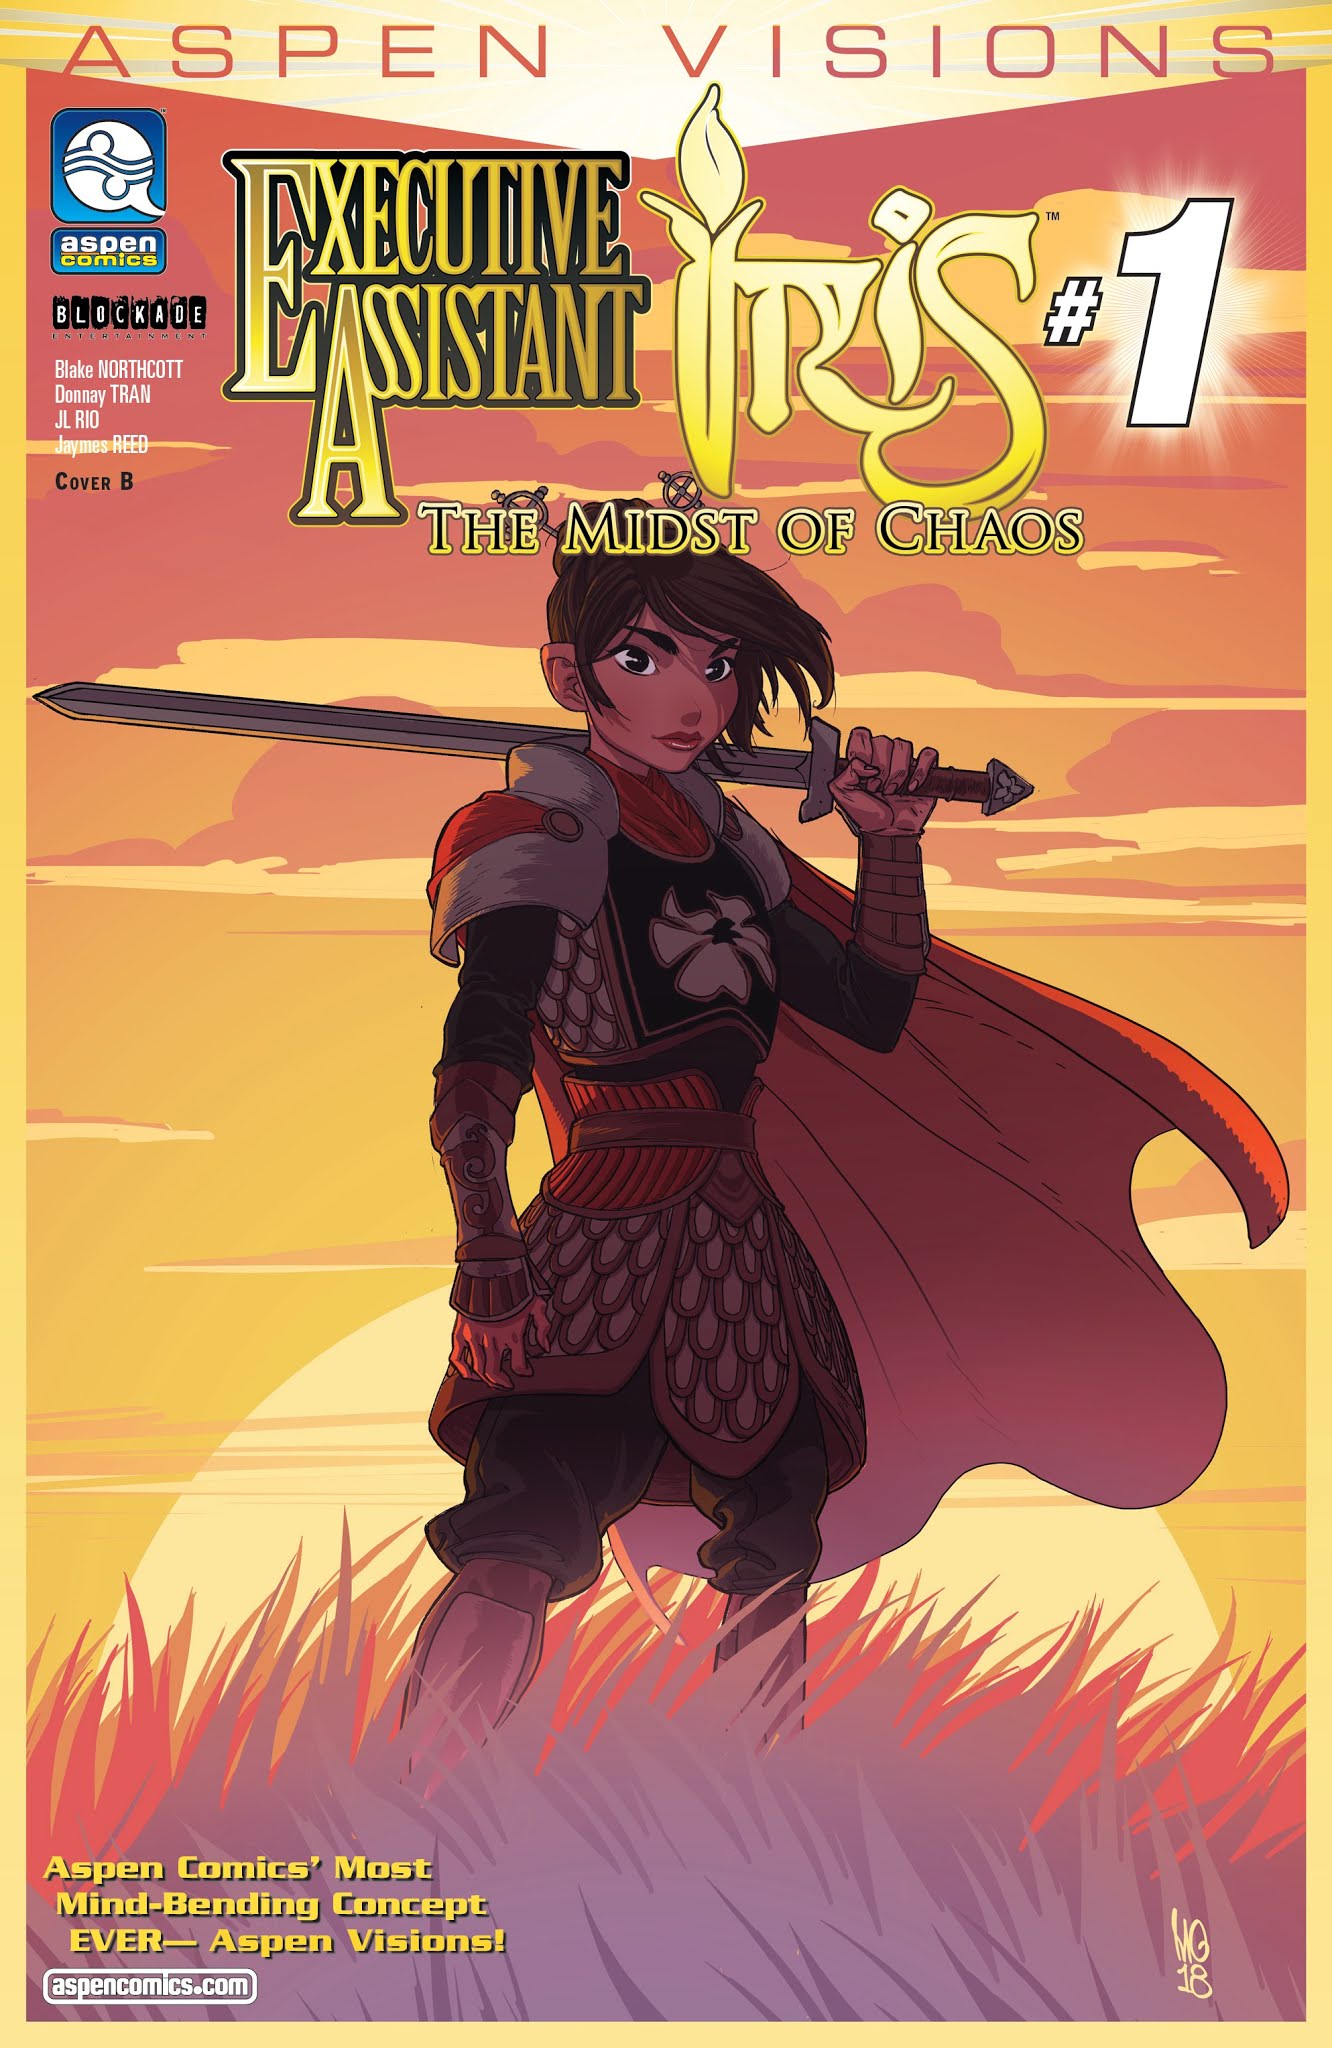 Read online Aspen Visions: Executive Assistant Iris: The Midst of Chaos comic -  Issue #1 - 2